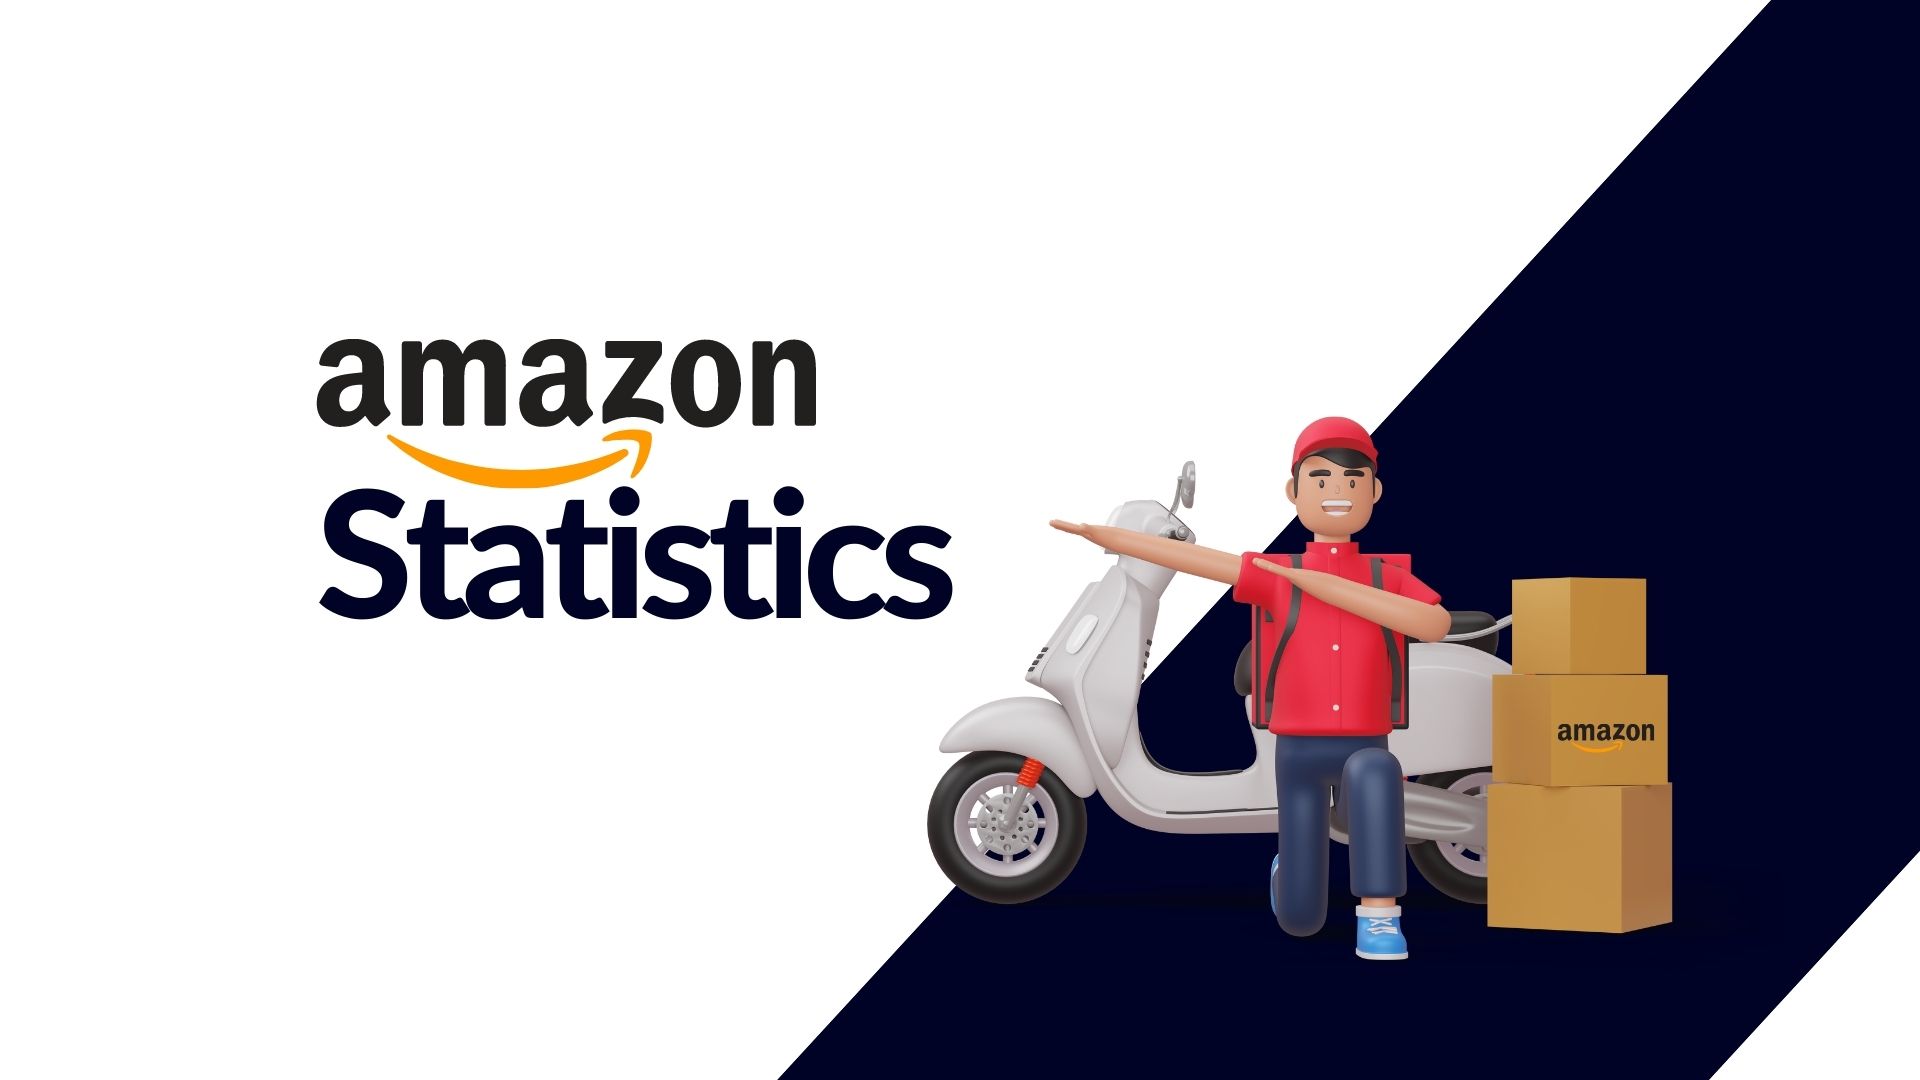 40+ Mind-Blowing Amazon Statistics for 2022: Facts, User Count, Revenue, and More